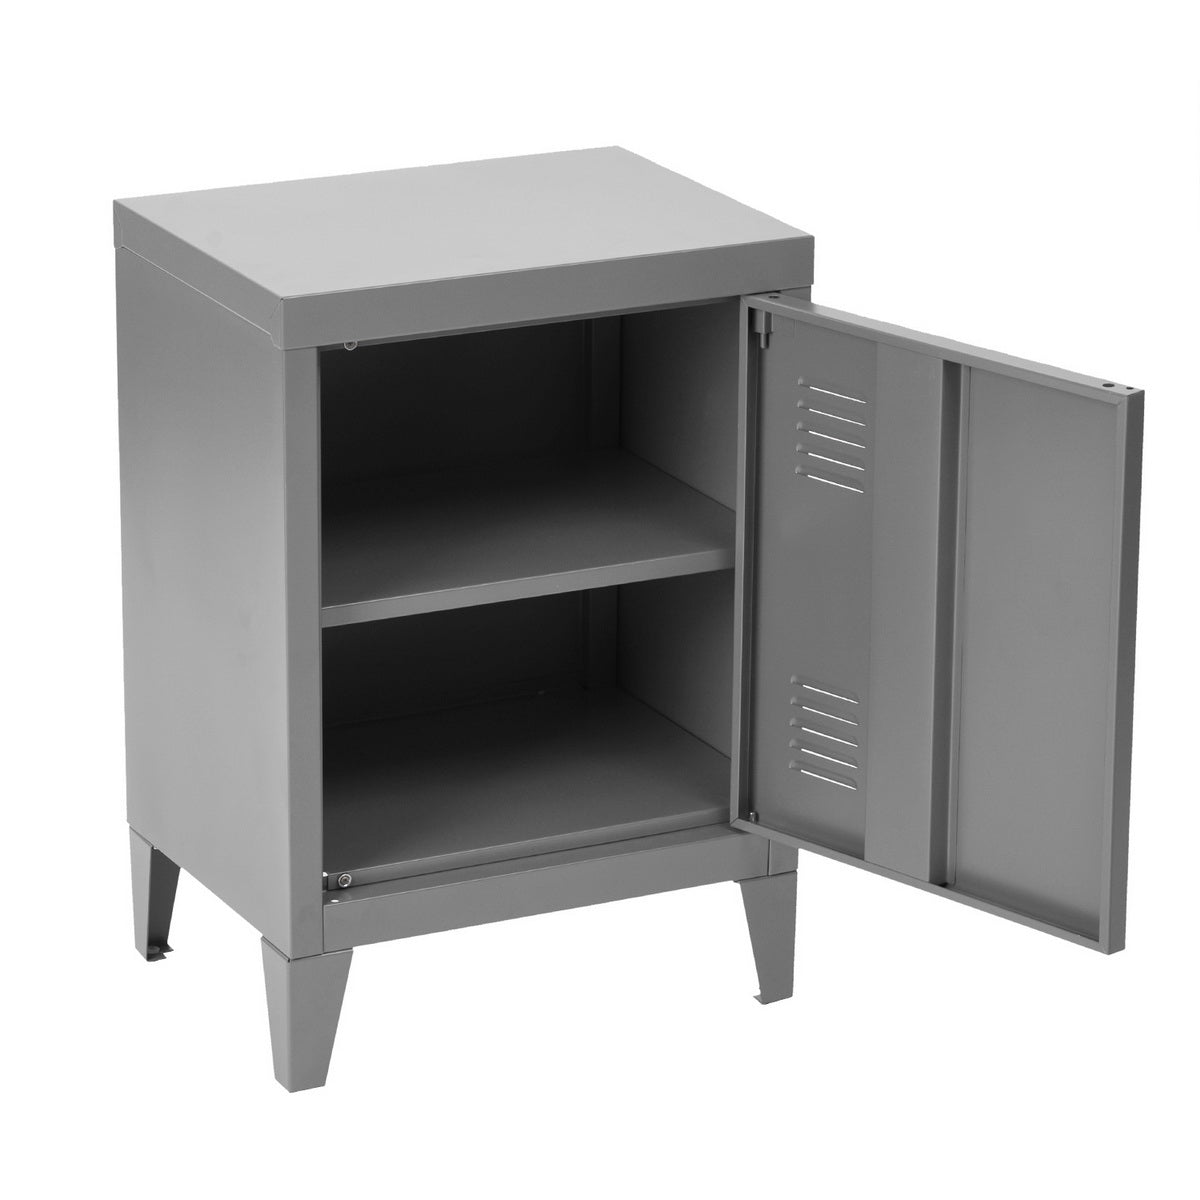 Metal bedside table with storage and industrial style shelf - GRAVES SOLO